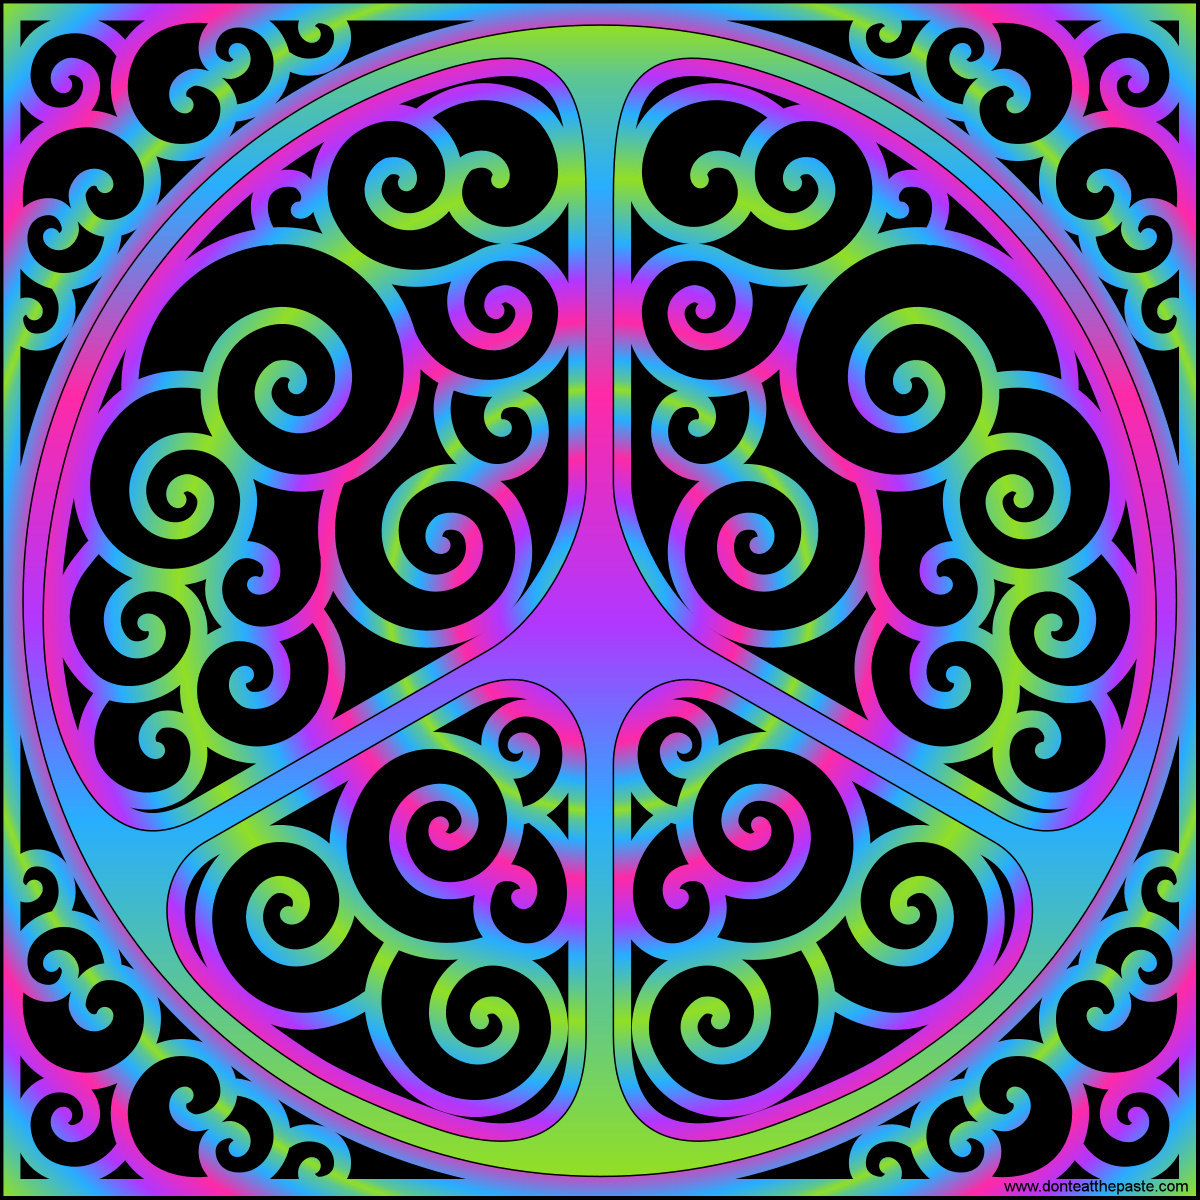 Swirled Peace Coloring or Doodling Page